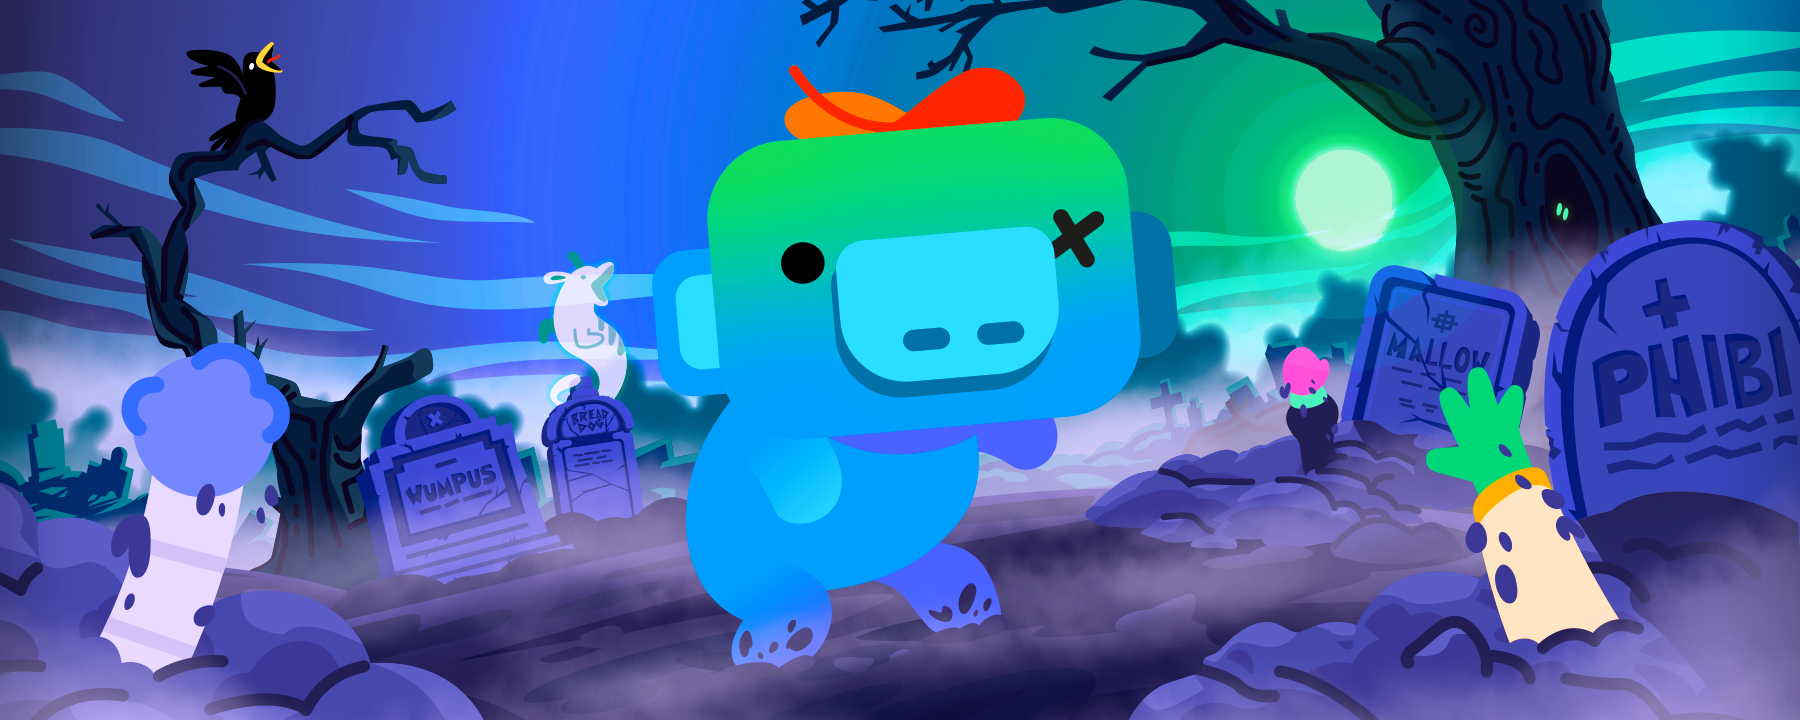 A zombified Wumpus roams through a graveyard. From the tombstones, Phibi, Mallow, and the ghost of Bread Dog rise from the grave. 